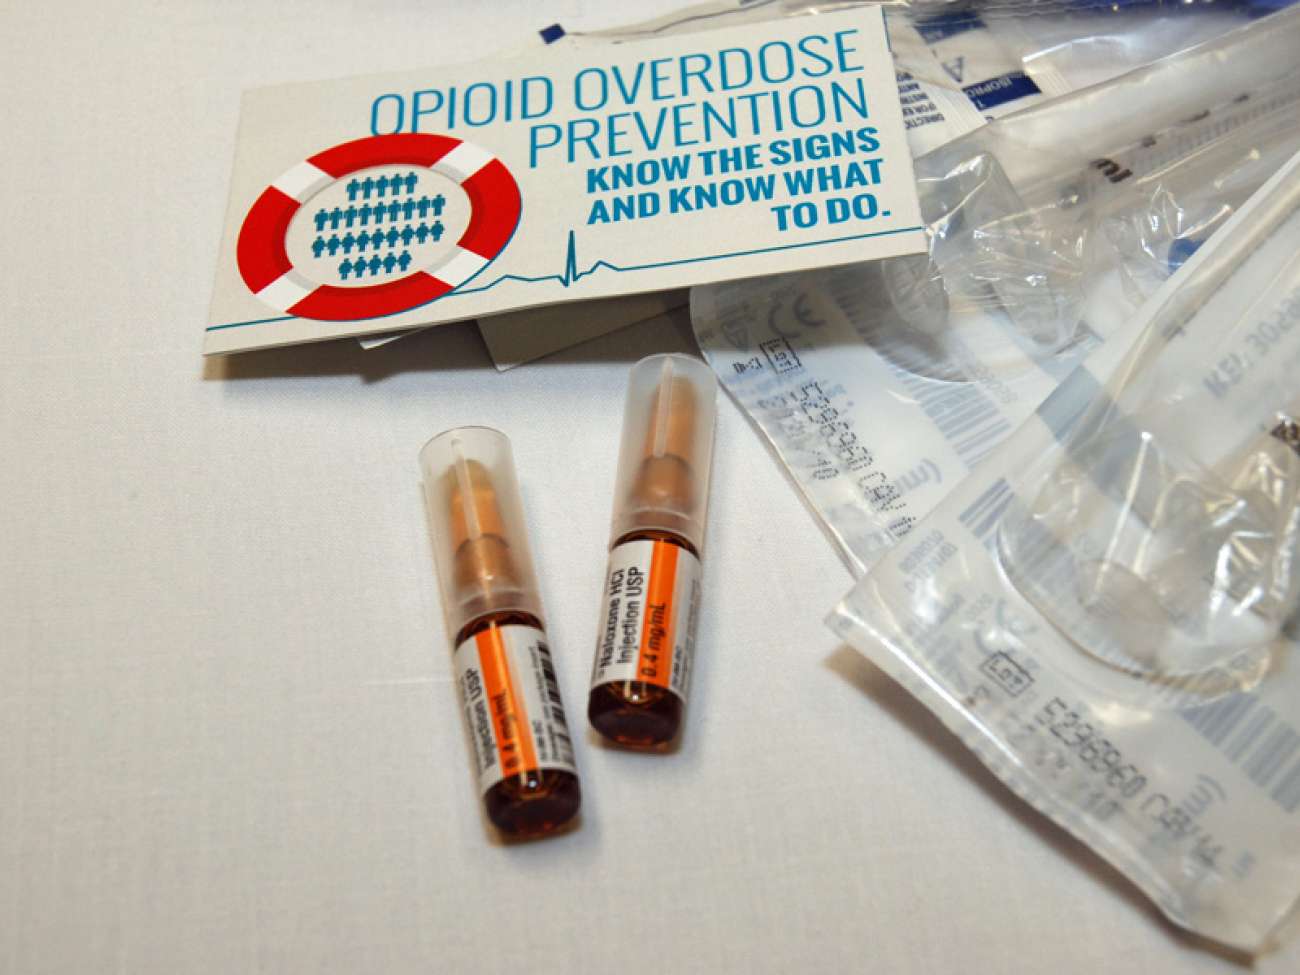 Each naloxone rescue kit includes two doses of the medication.